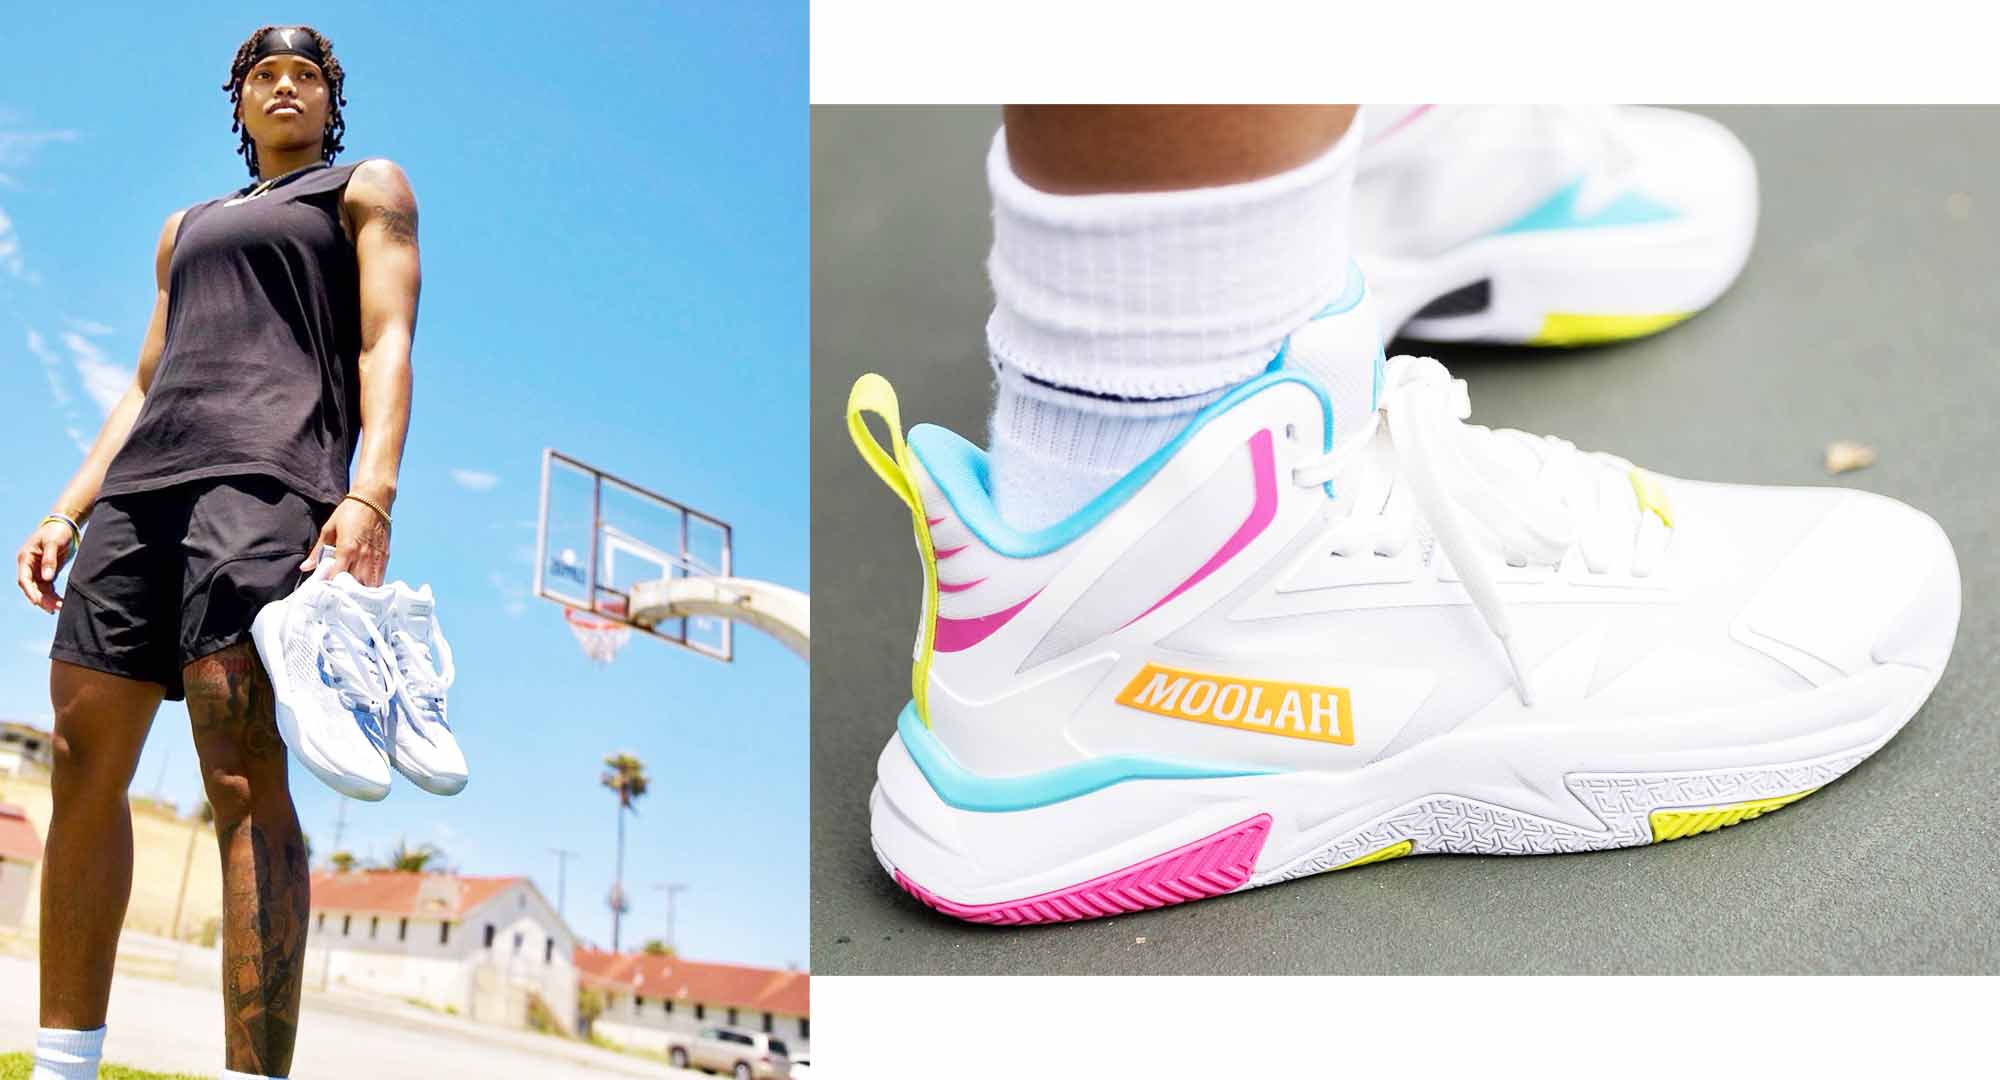 Moolah Kicks Fights Gender Inequality in Sports With a Pair of Shoes ...